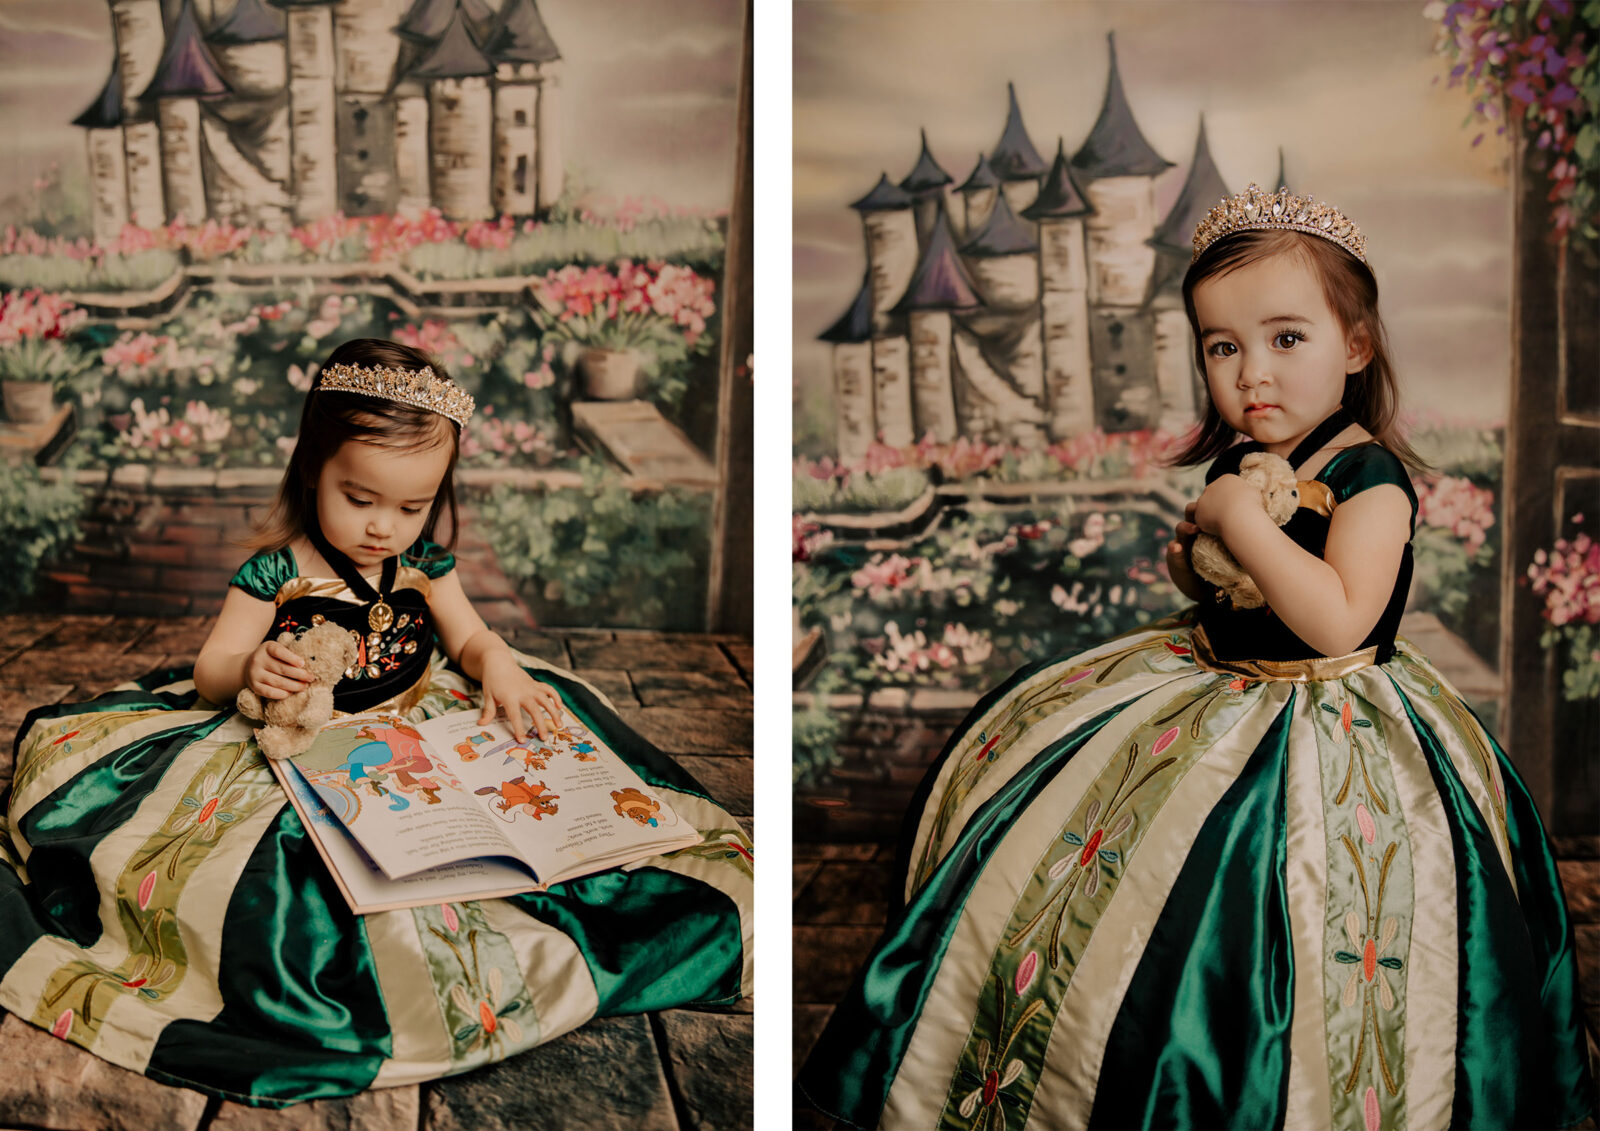 A girl dressed as a princess in a green princess anna gown, by Broom Tree Photo